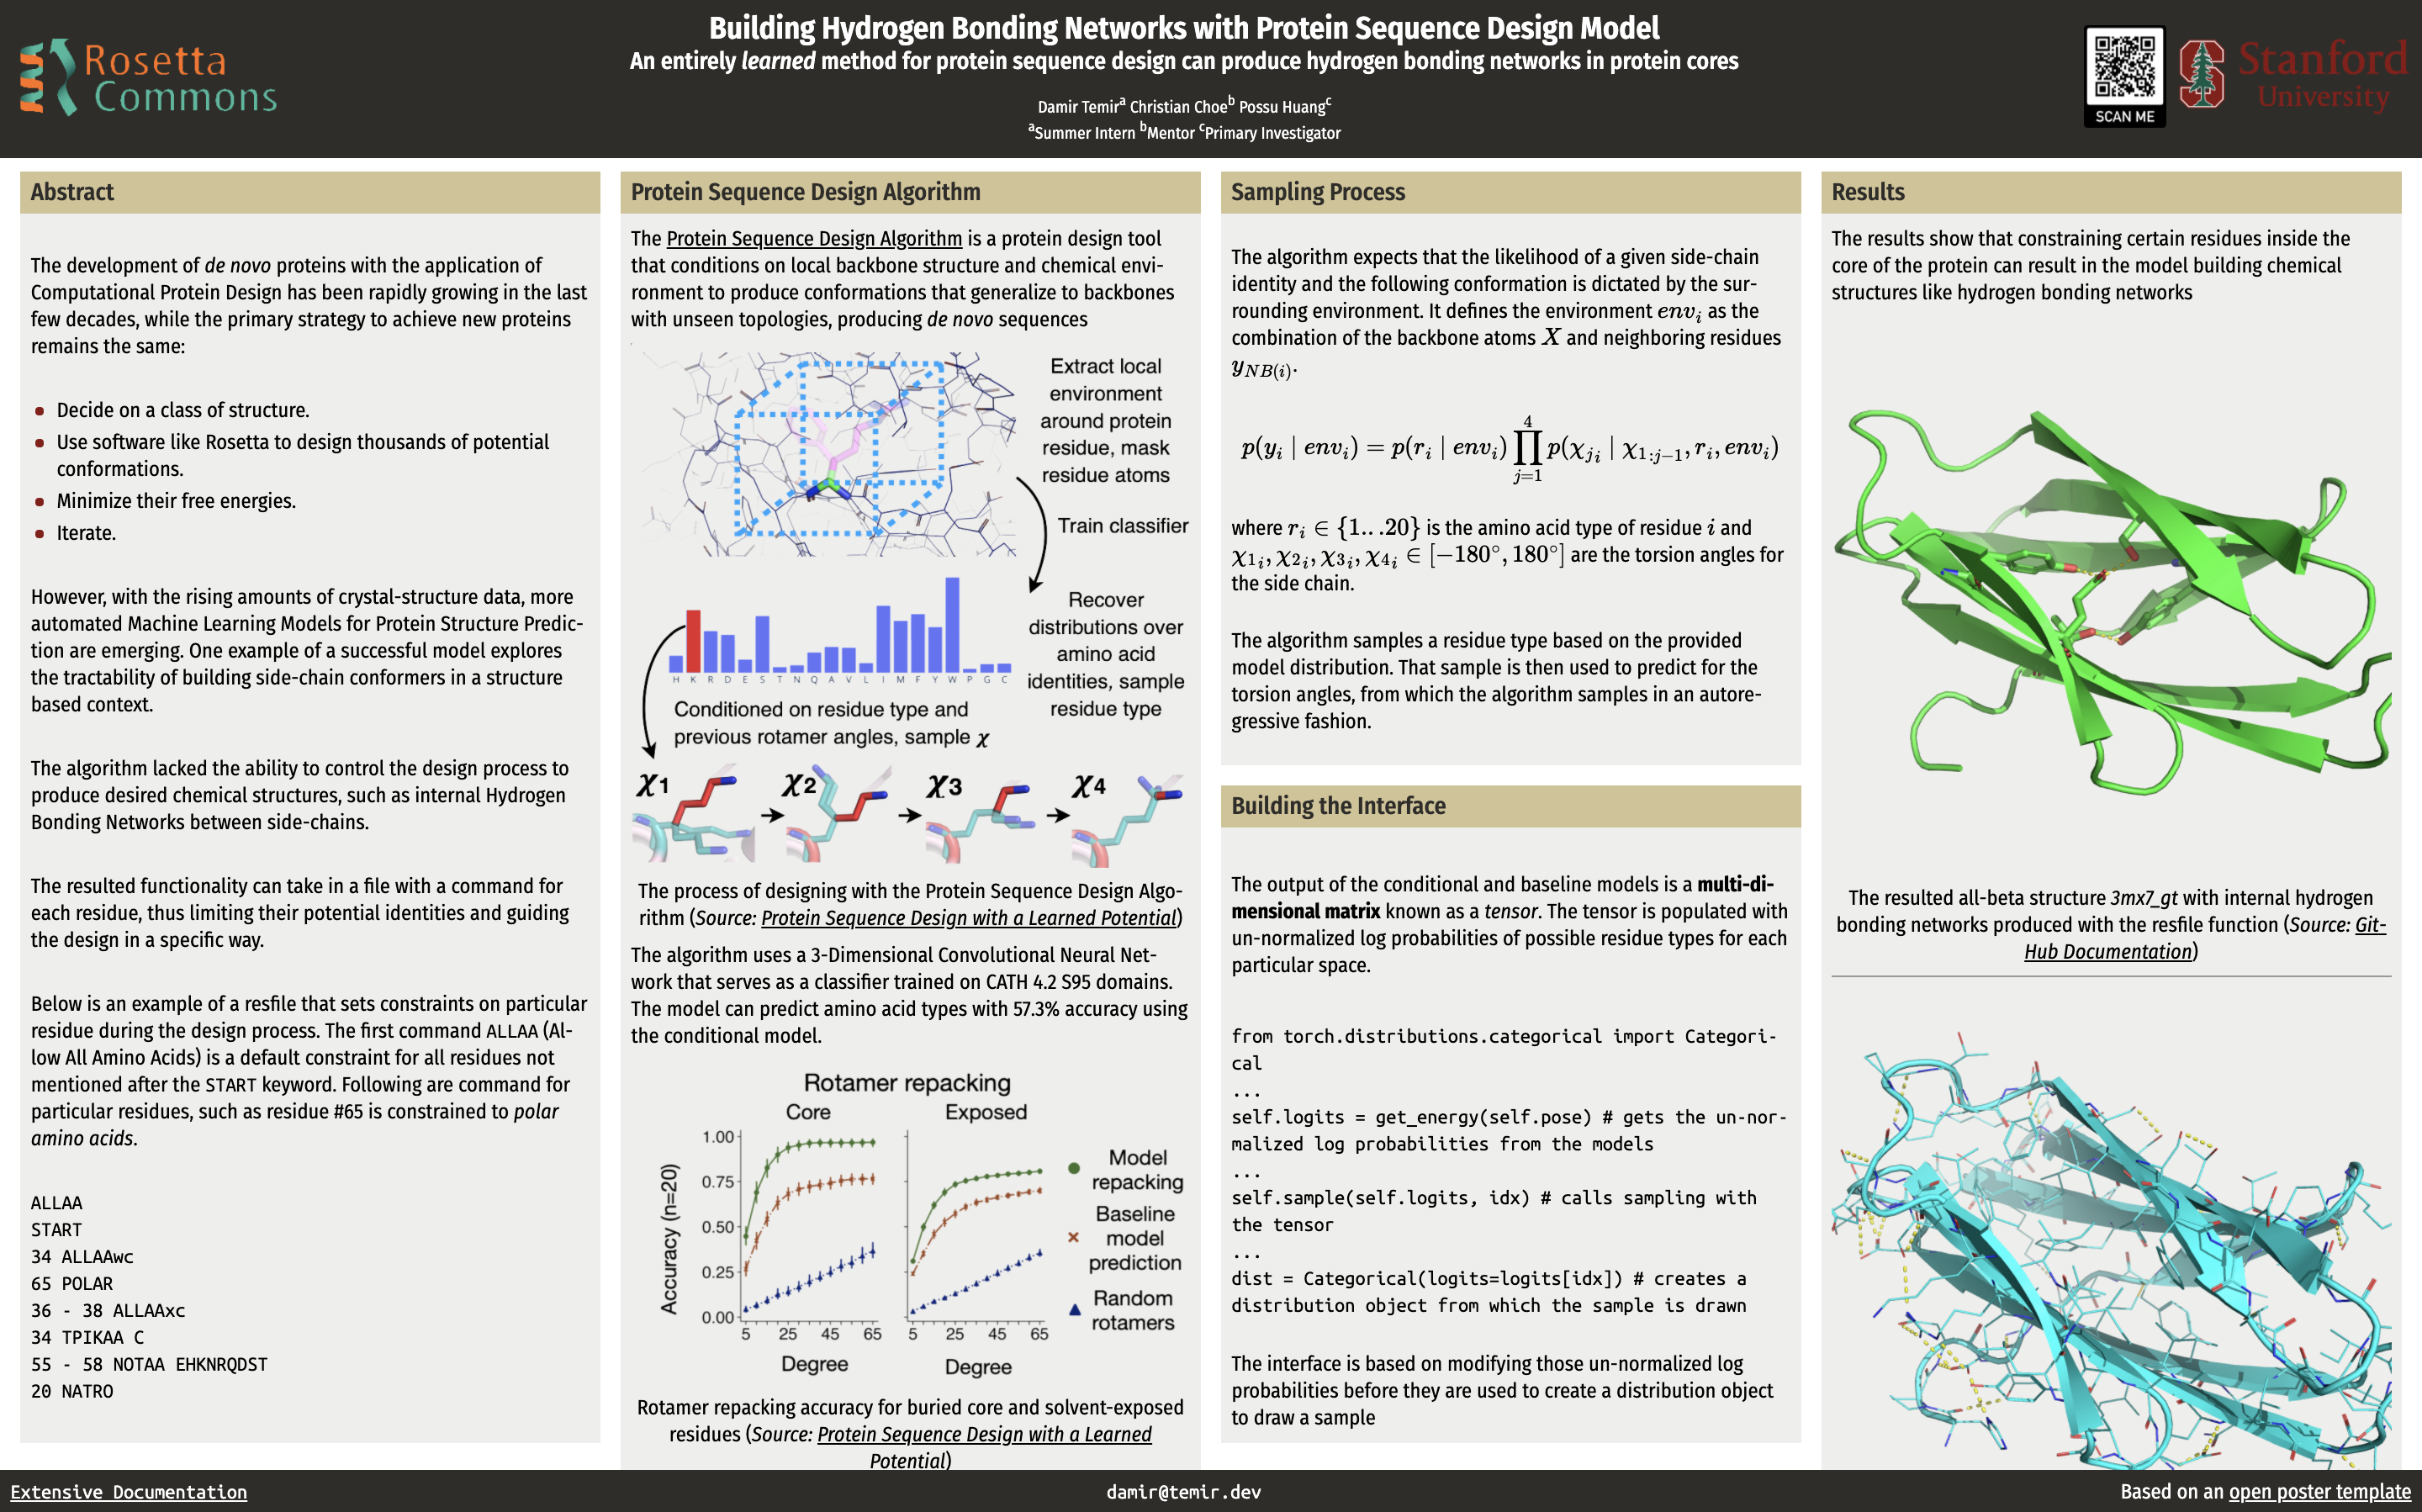 My poster titled Building Hydrogen Bonding Networks with Protein Sequence Design Model that covers my work on the project during the summer